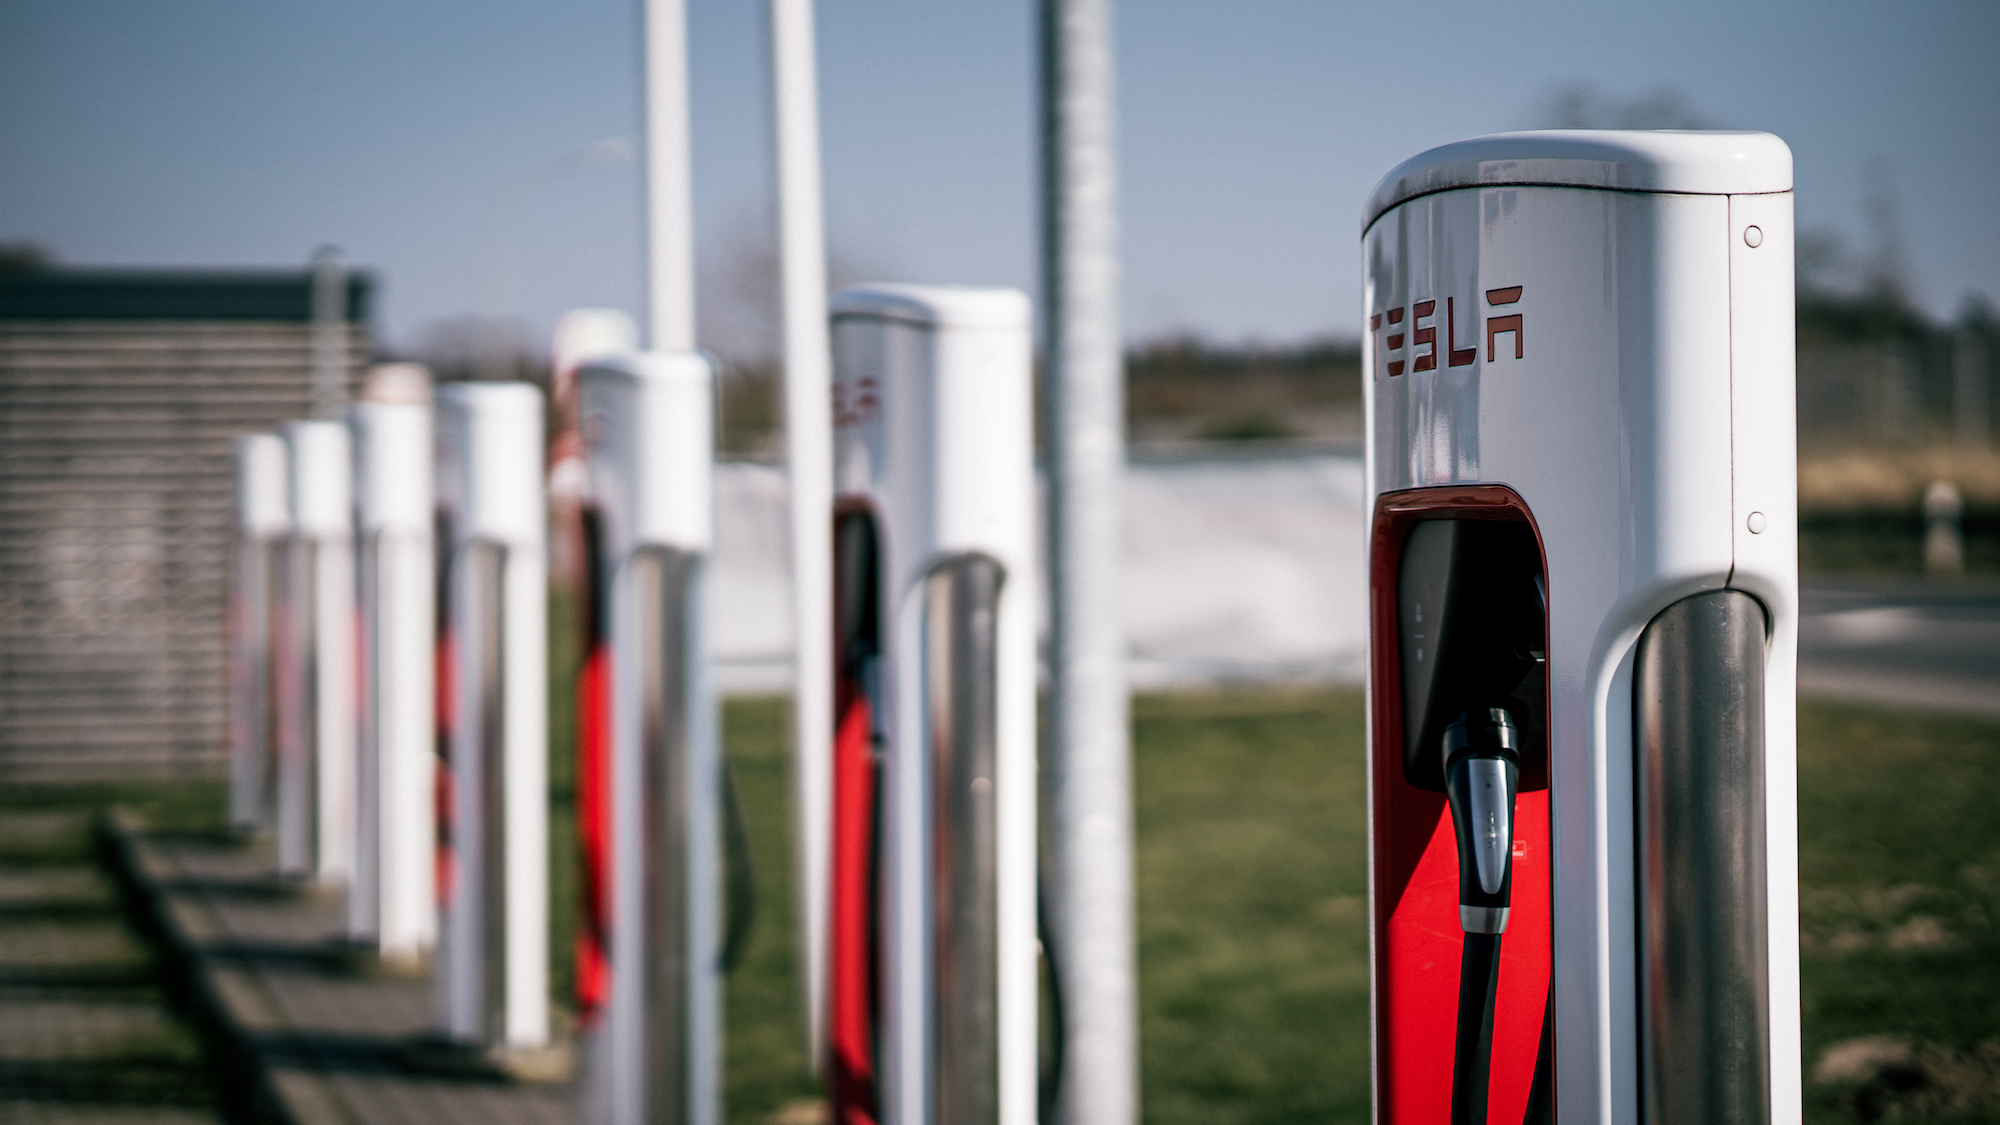 A row of Tesla charging stations is pictured.